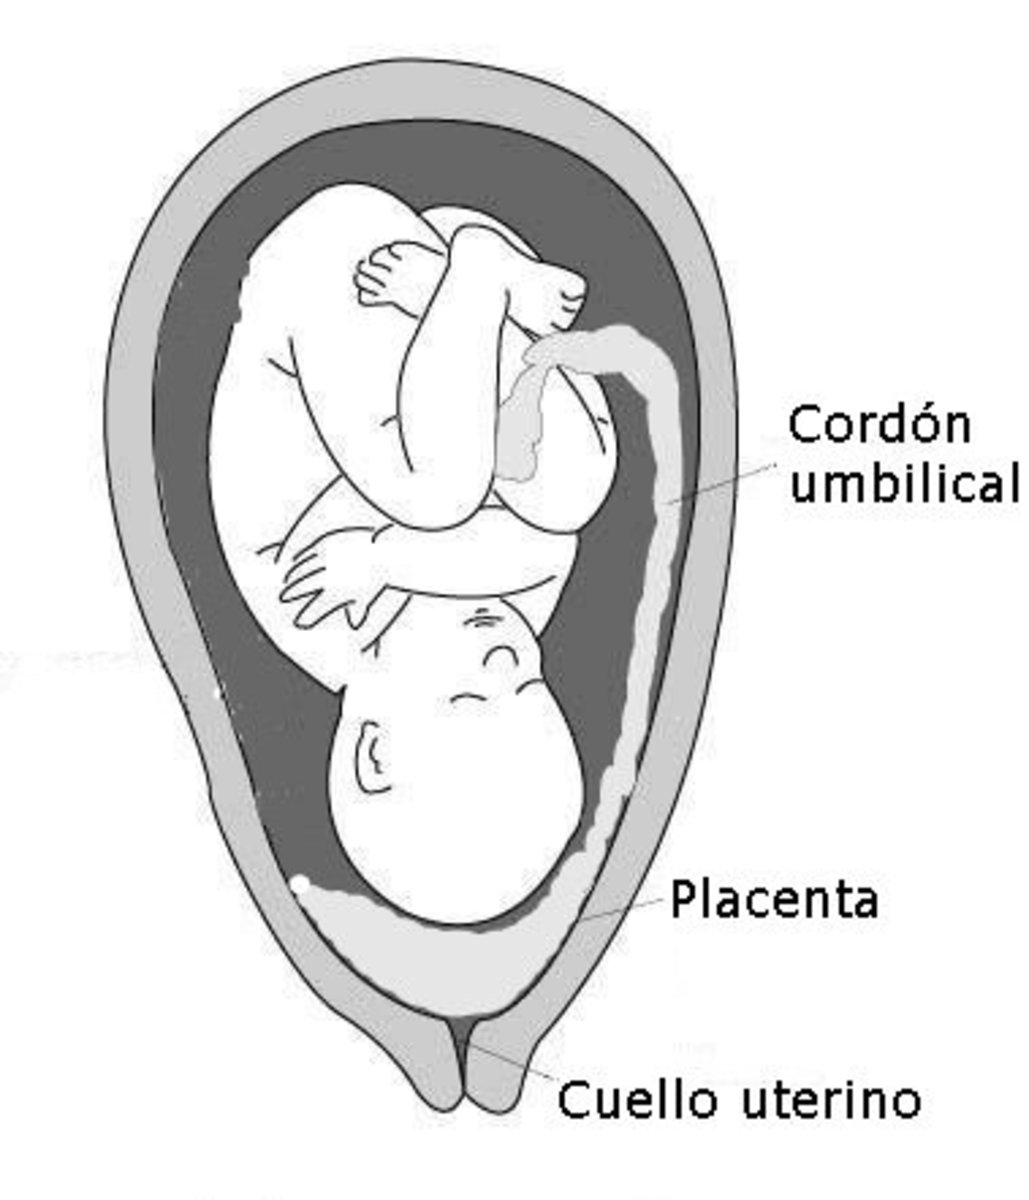 Placenta previa may cause bleeding during late pregnancy. Women should receive an ultrasound during the second trimester to identify this condition.